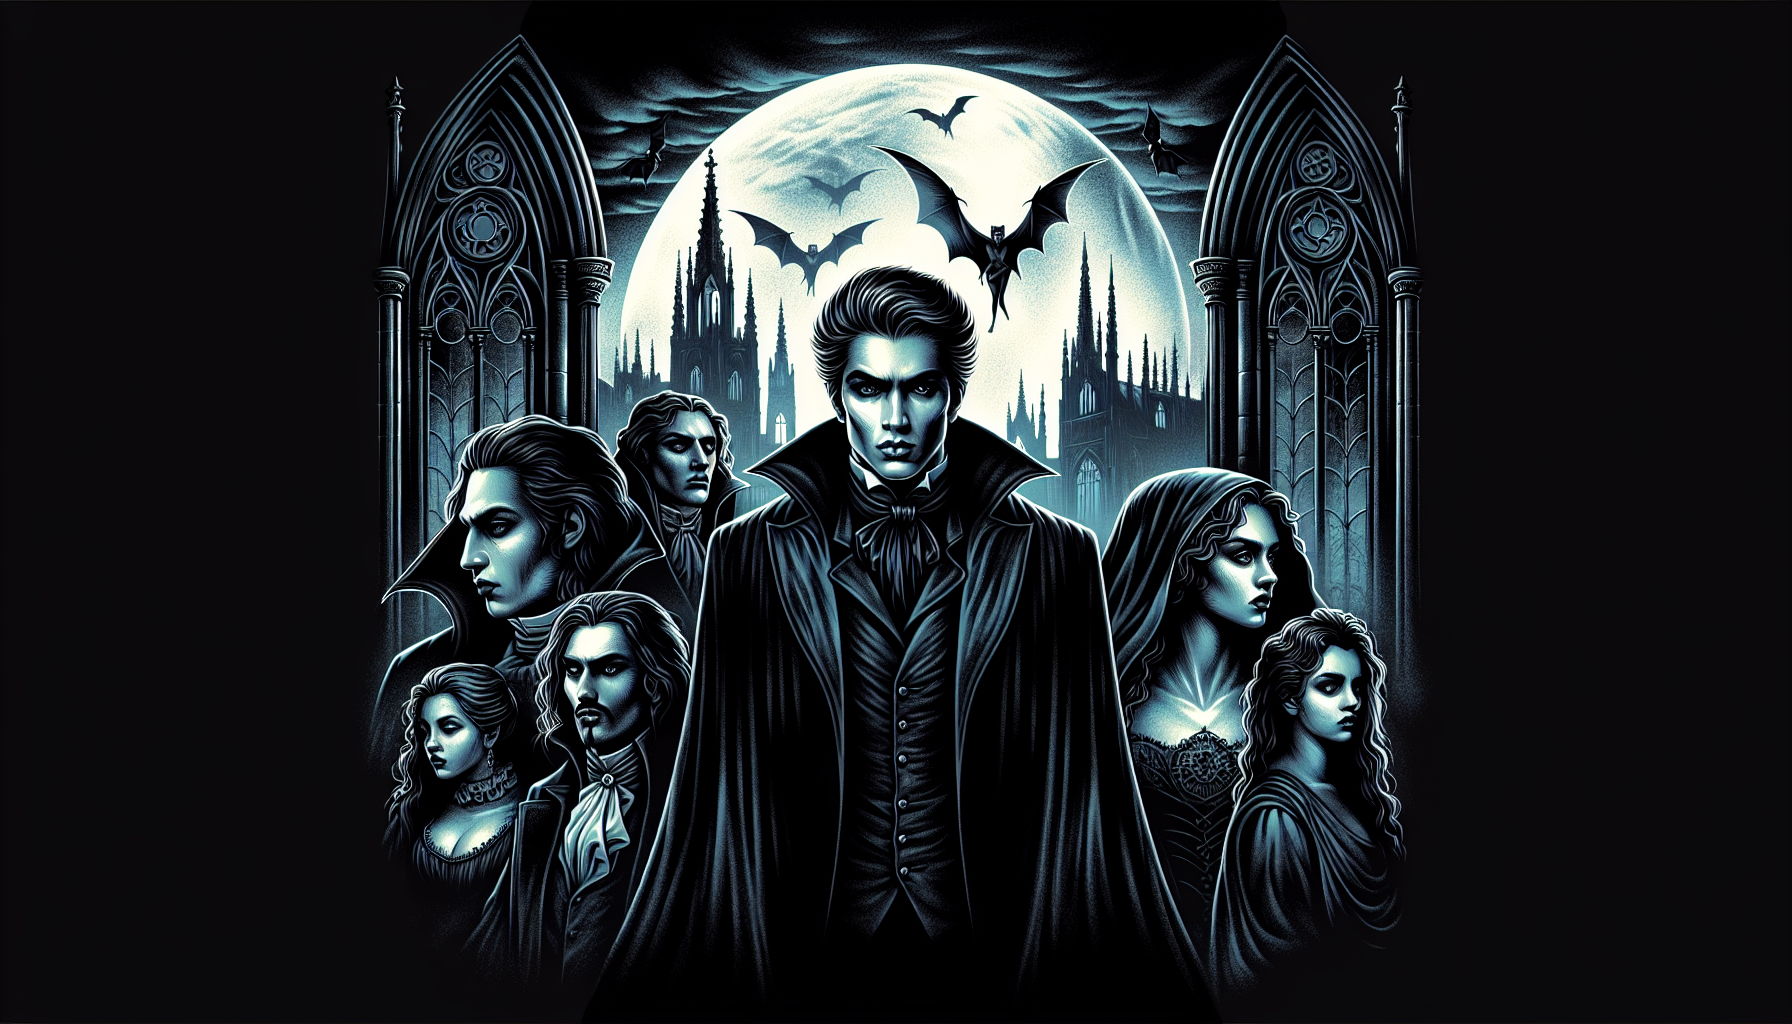 Illustration of vampire characters from Anne Rice's novels